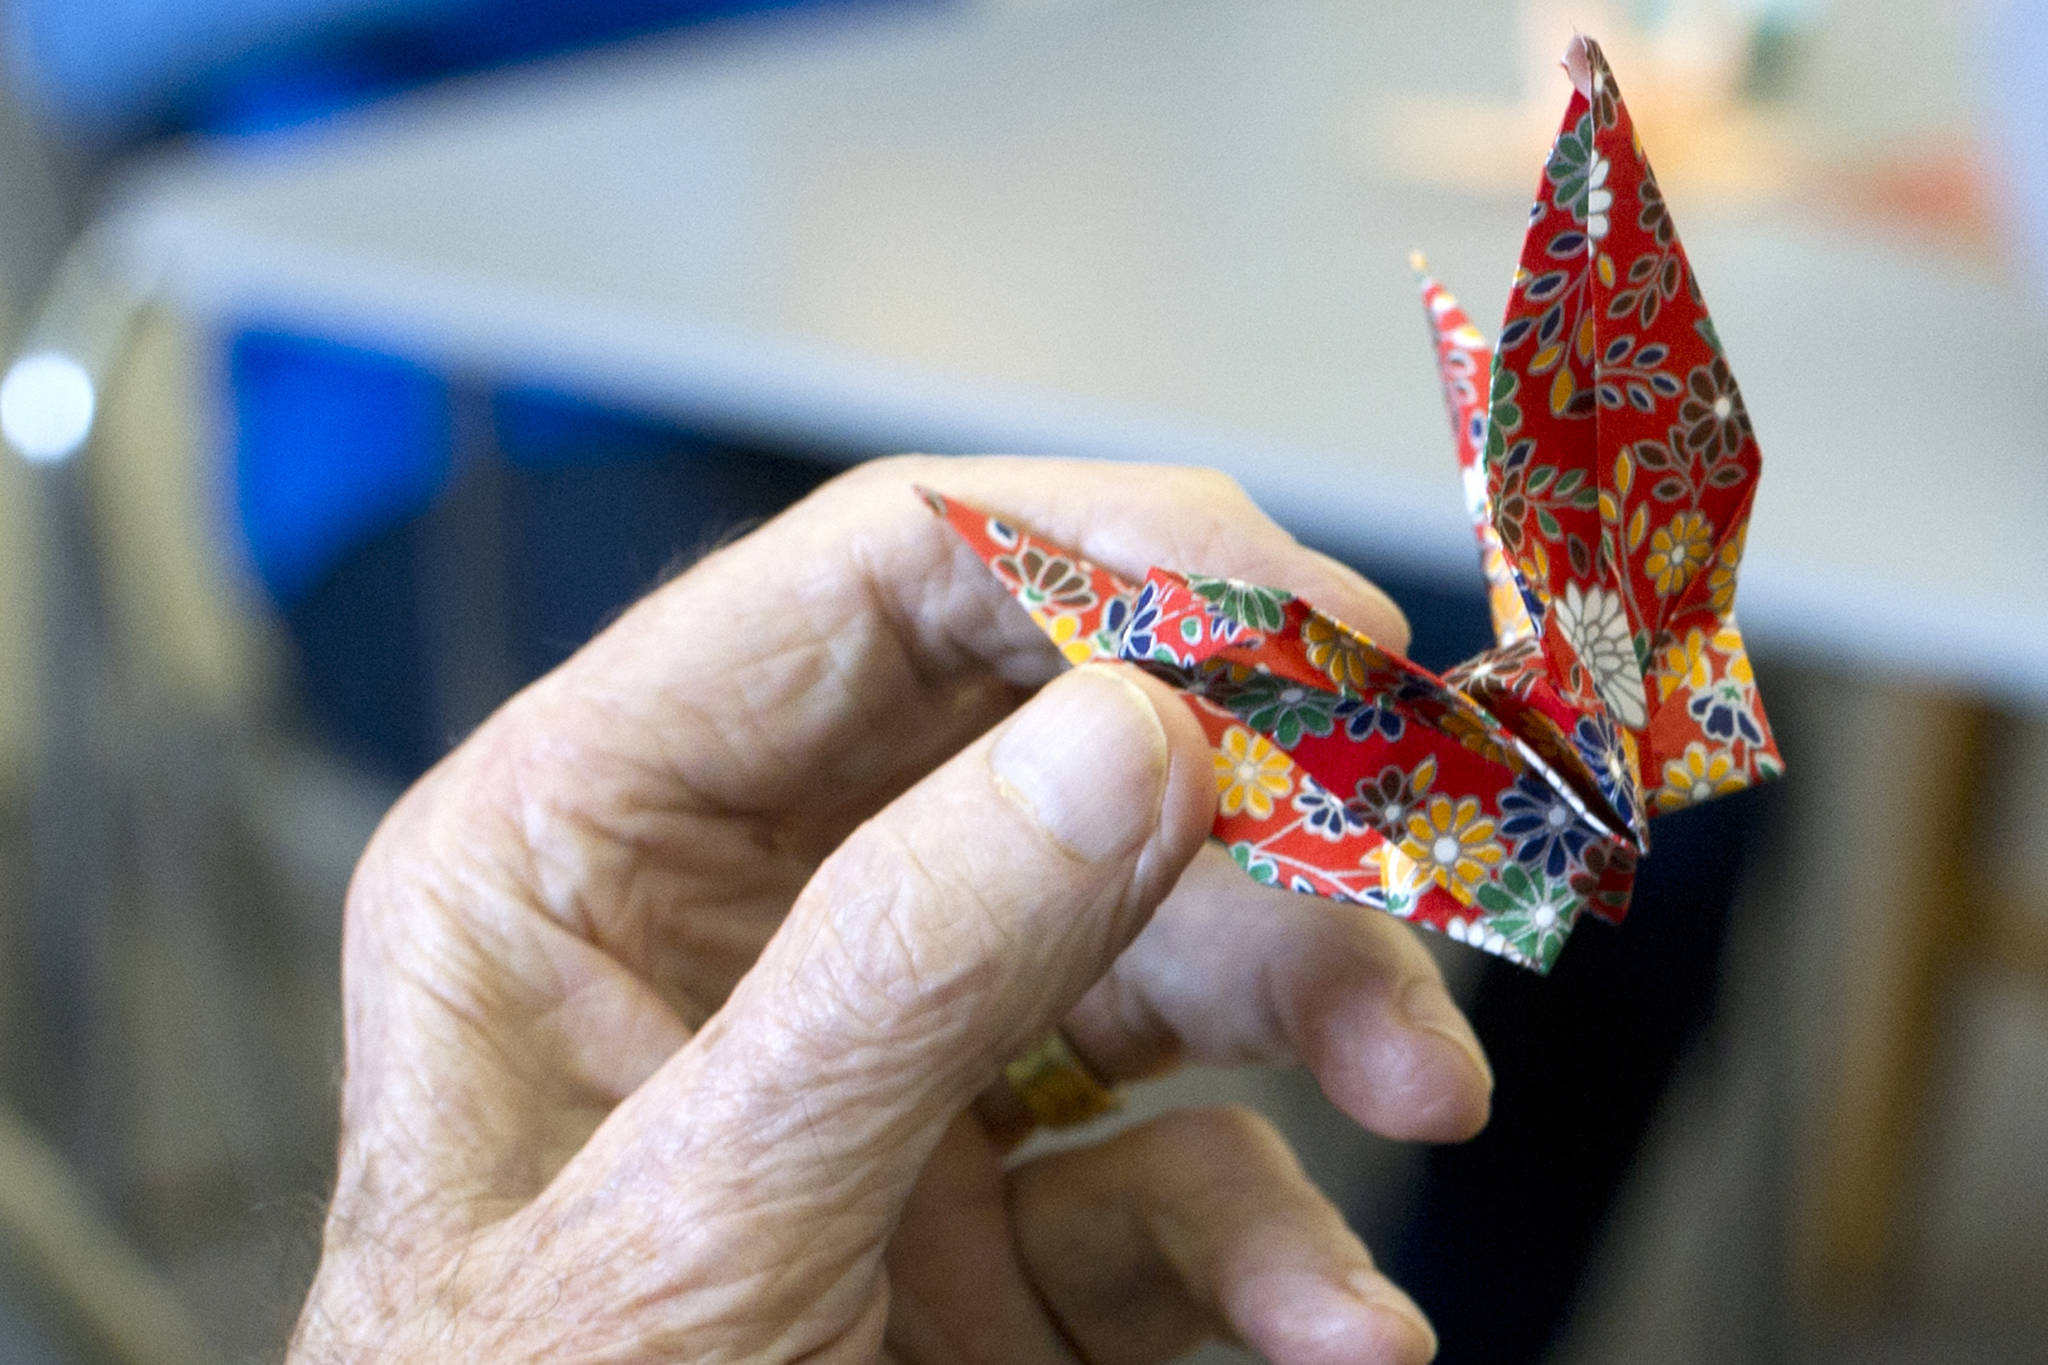 A Juneau Pioneer Home resident holds a paper crane made during a visit by Haborview Elementary School students in April 2016. (Michael Penn | Juneau Empire File)